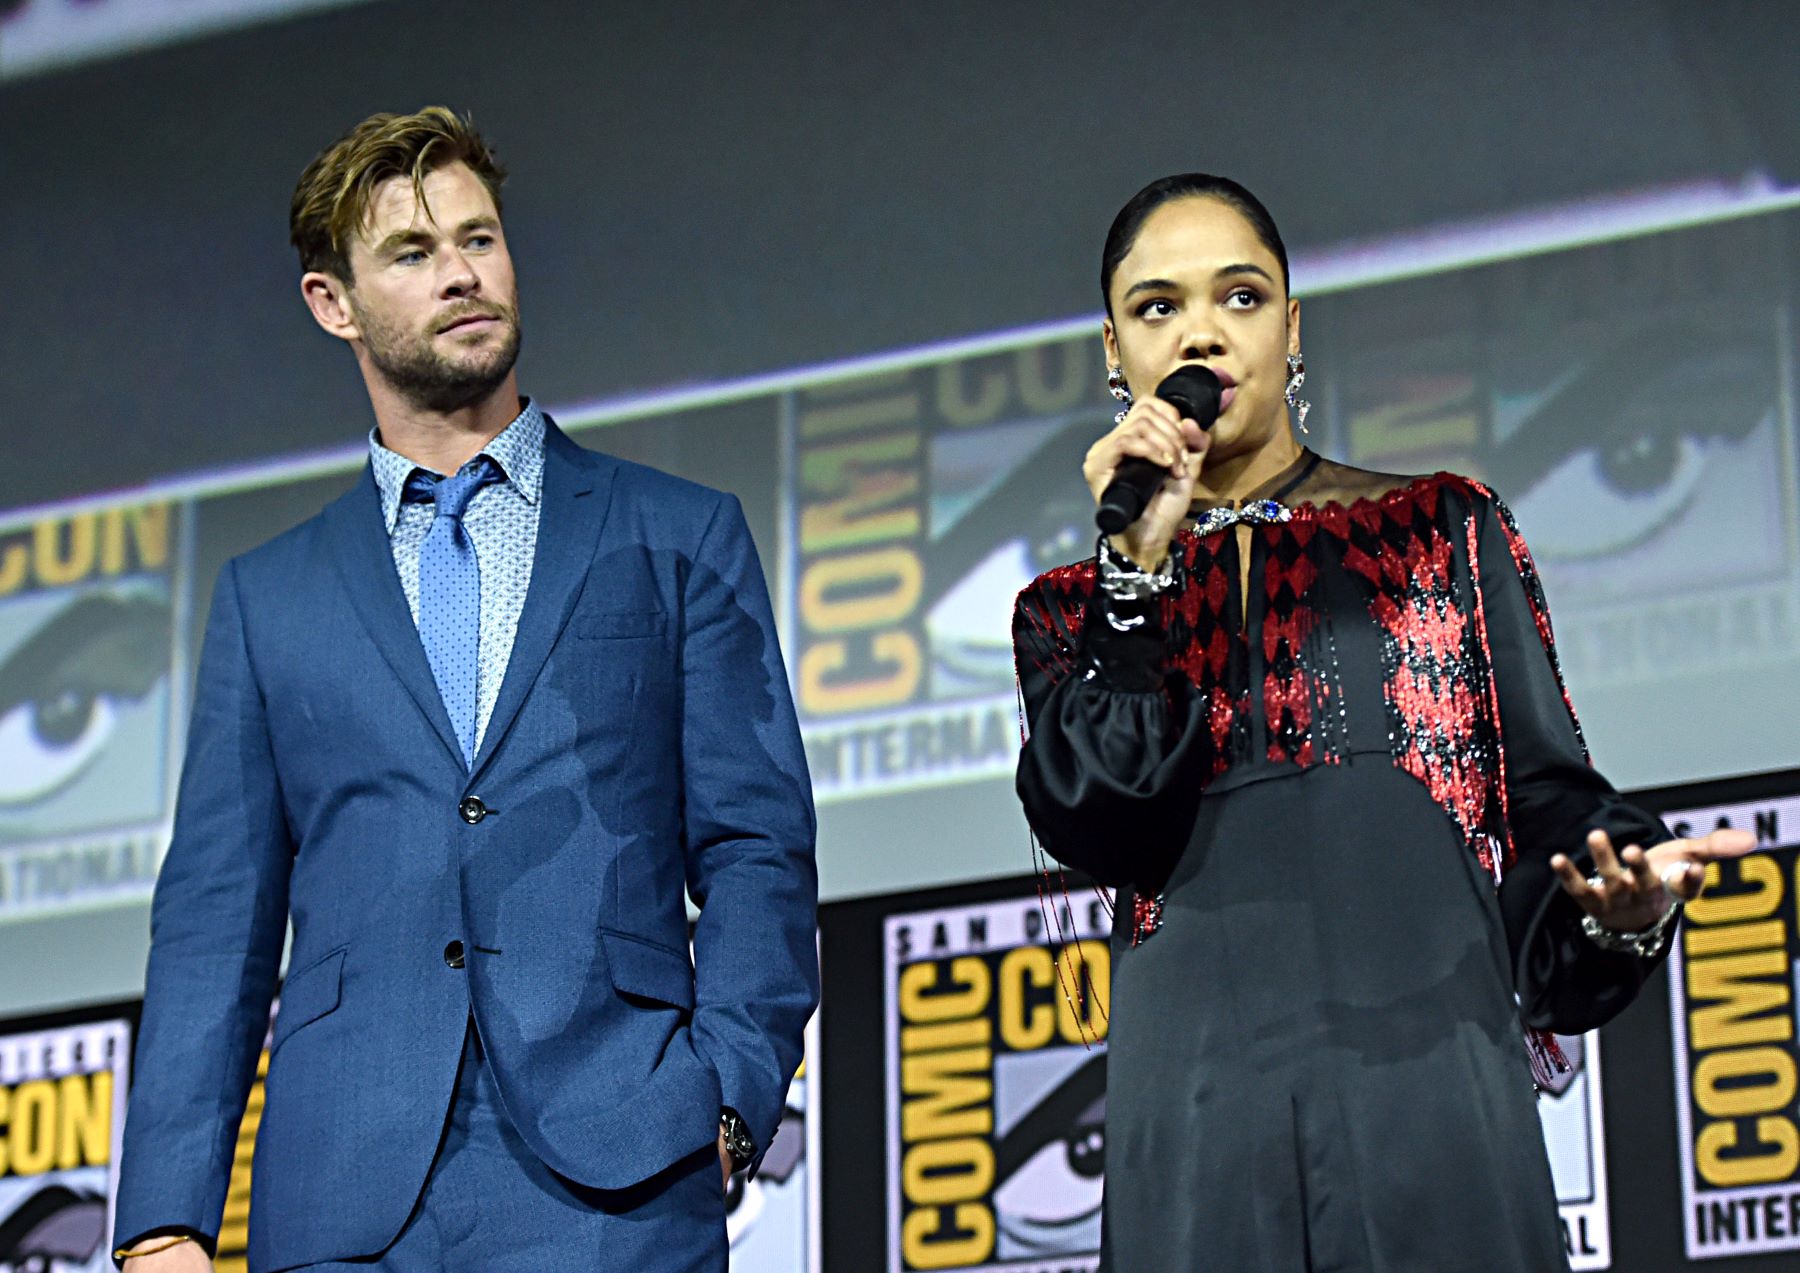 Chris Hemsworth and Tessa Thompson at the San Diego Comic-Con International for 'Thor: Love and Thunder'